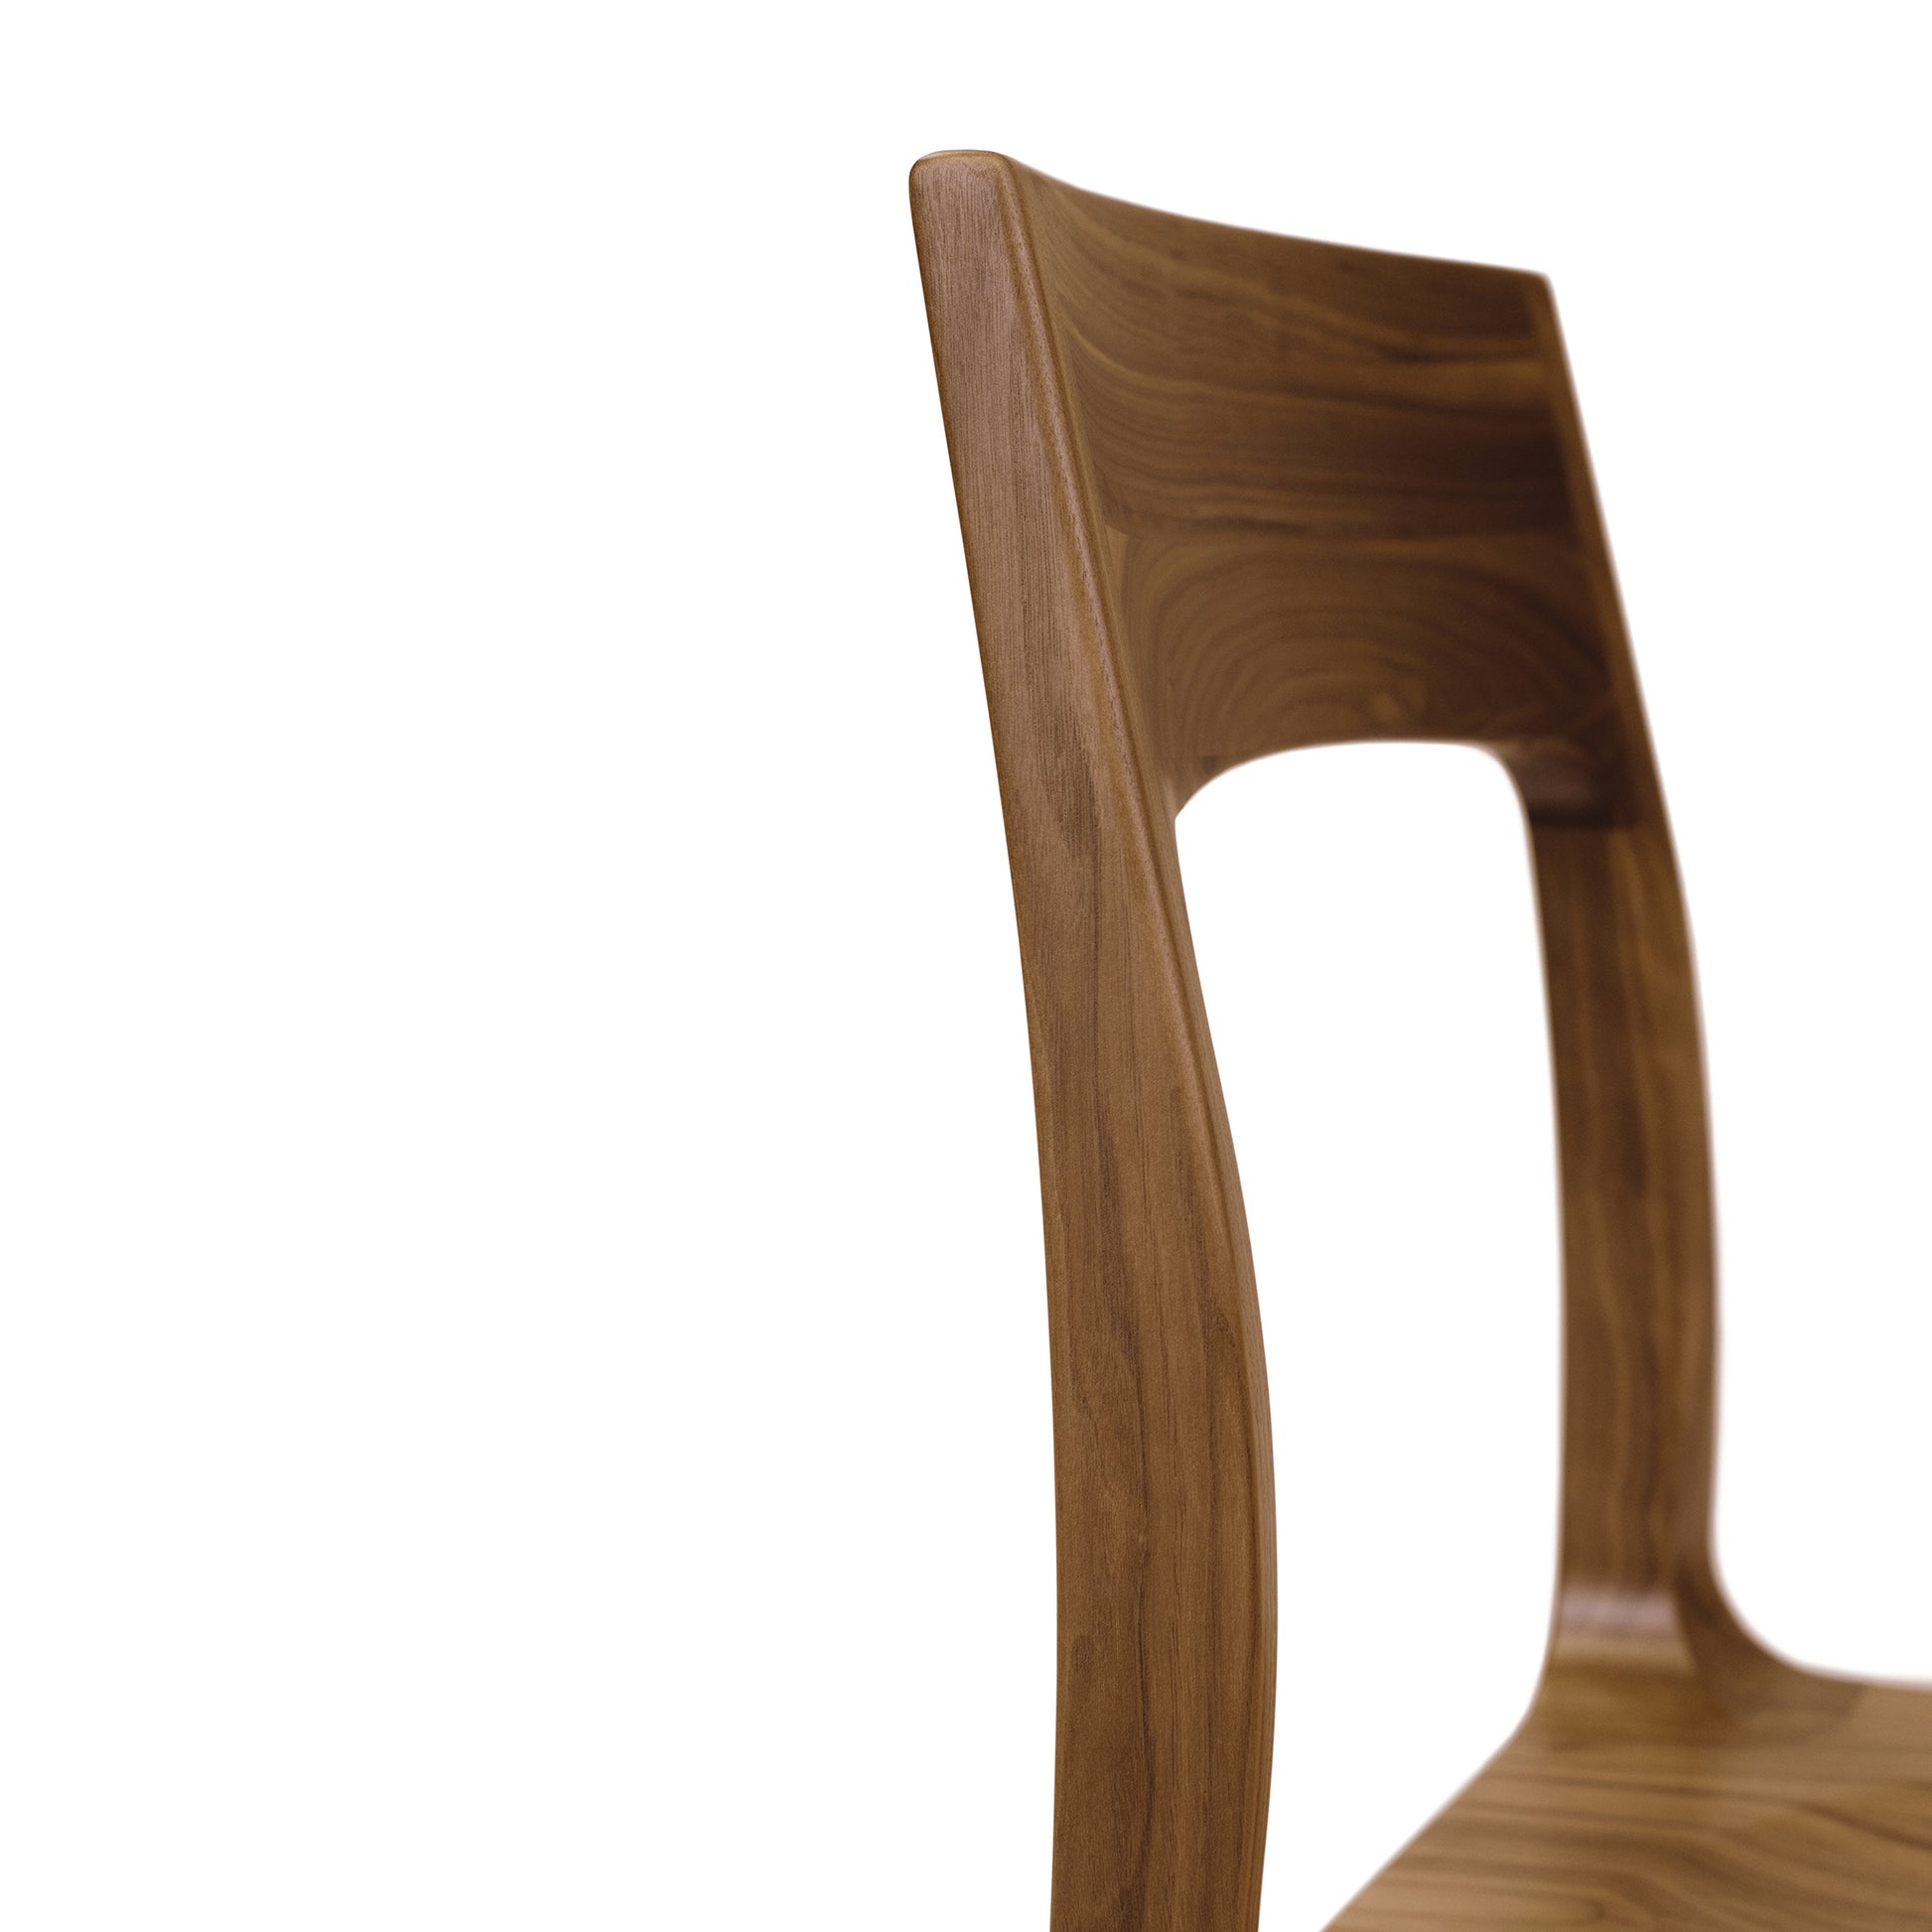 A close up of a wooden chair on a white background.